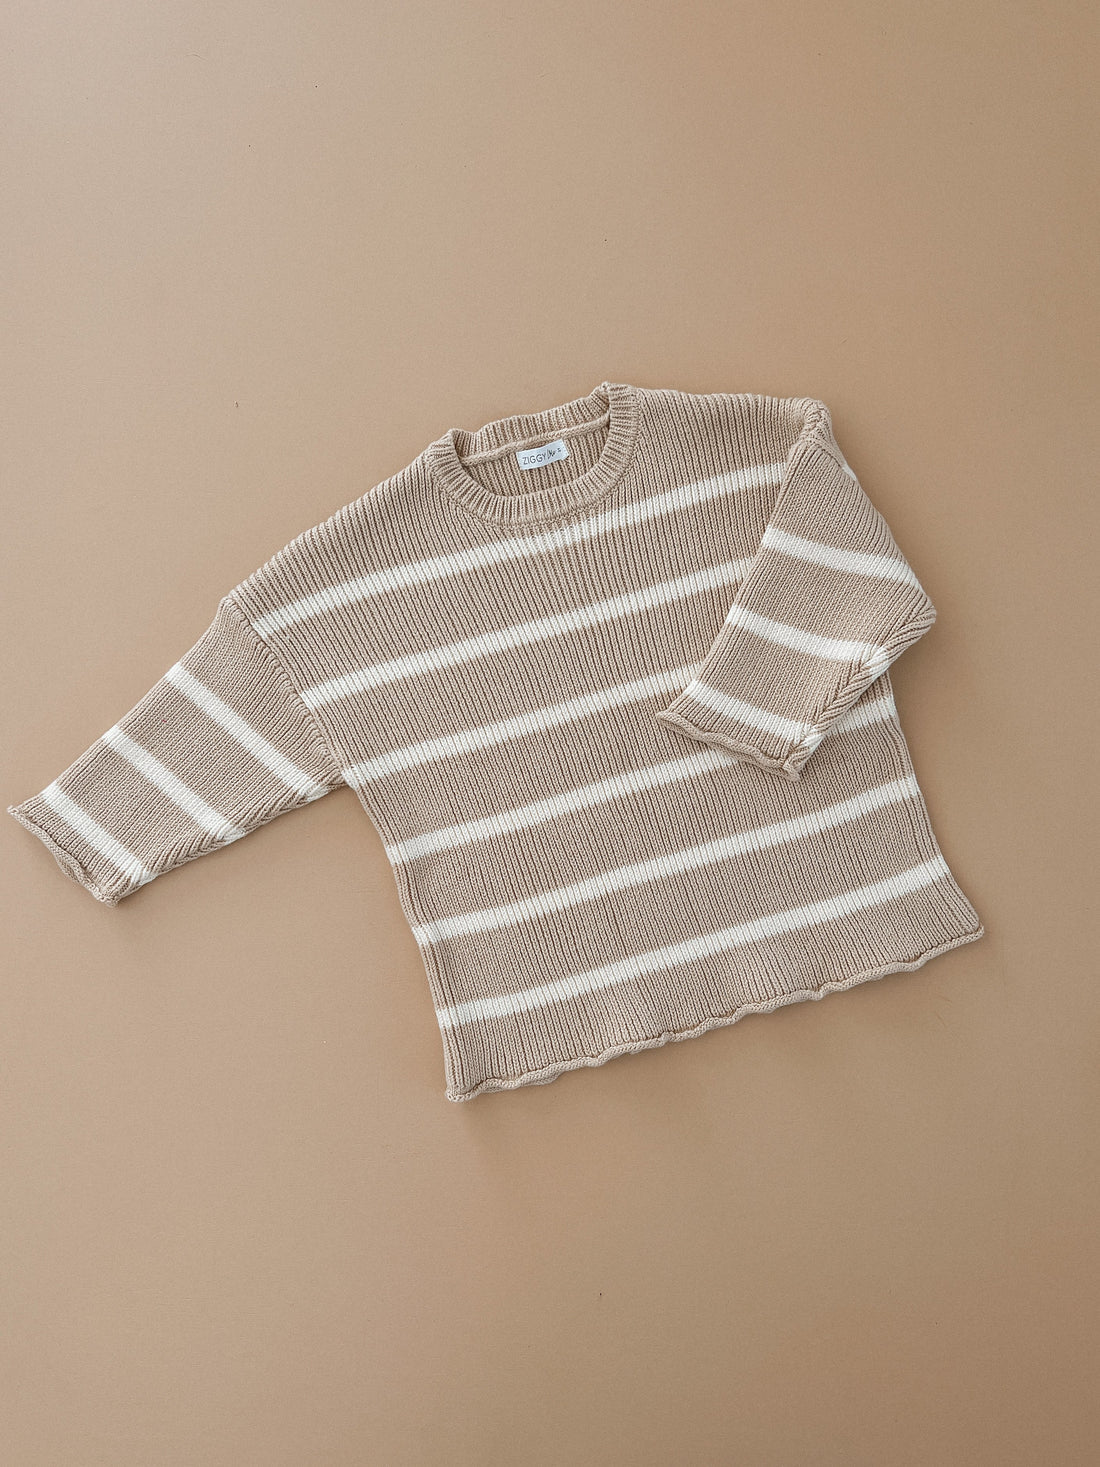 【LAST ONE】ZIGGY LOU - PULLOVER | BISCUIT STRIPES RIBBED